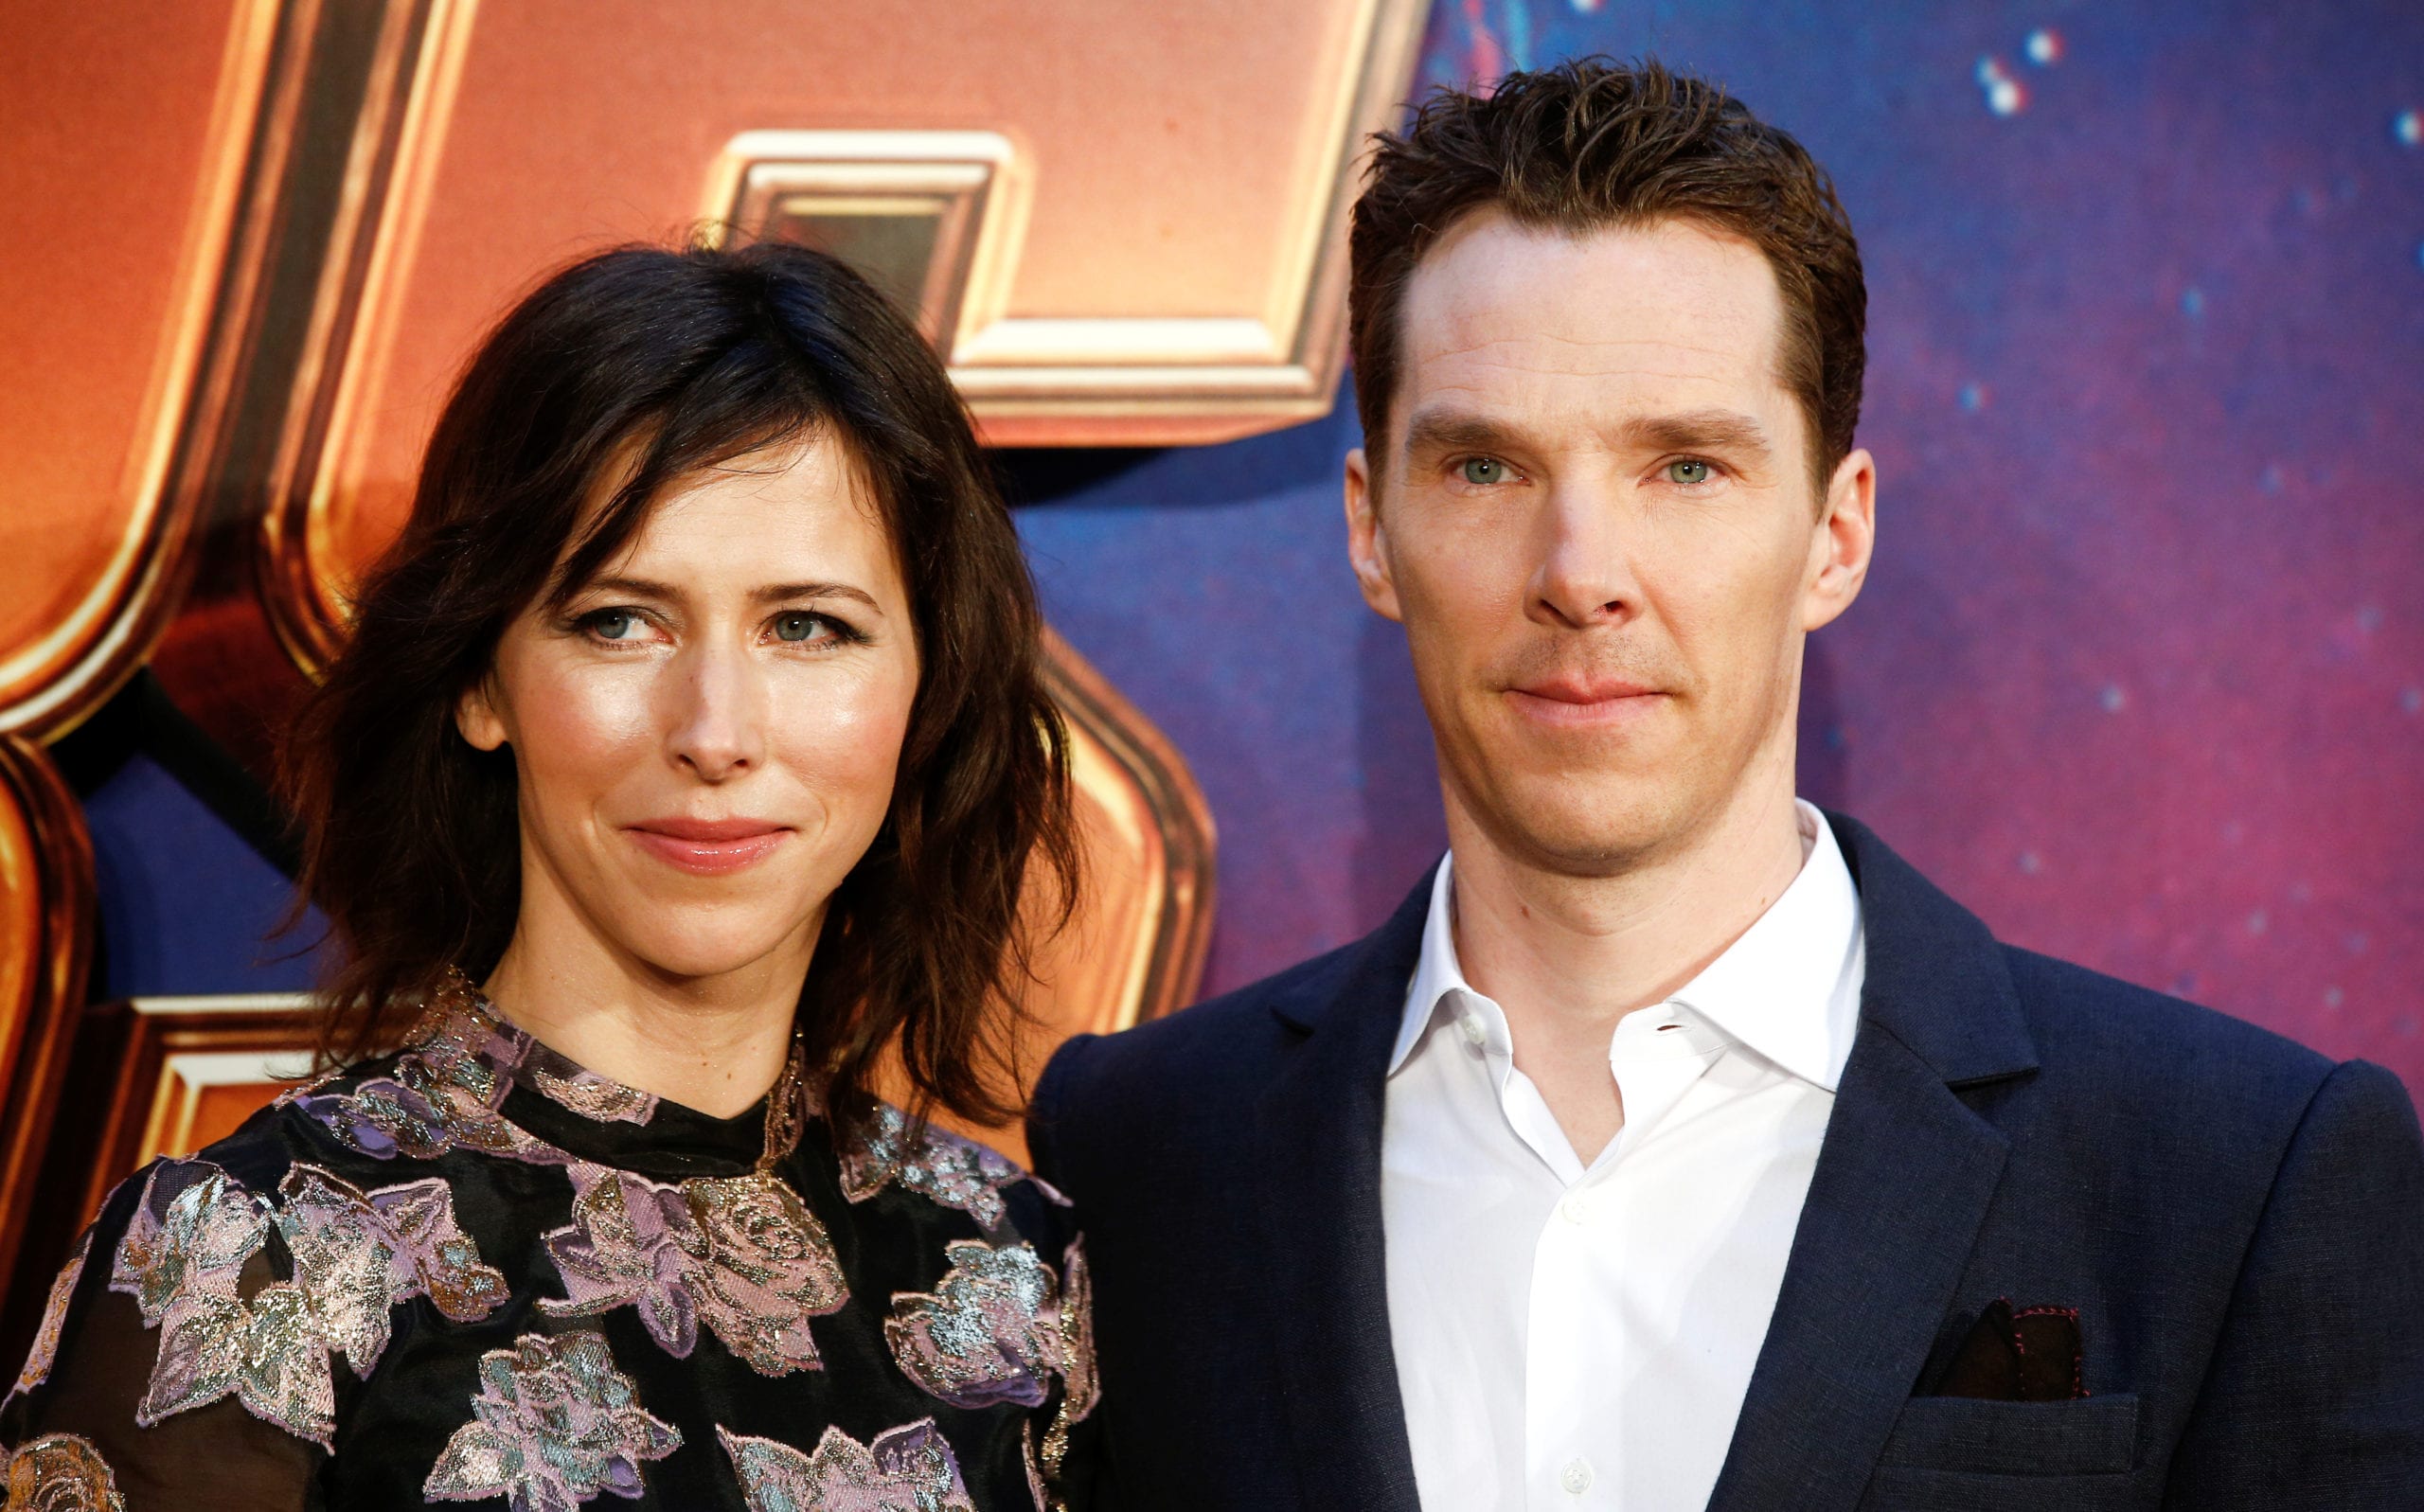 Benedict Cumberbatch and his wife Sophie Hunter. REUTERS/Henry Nicholls